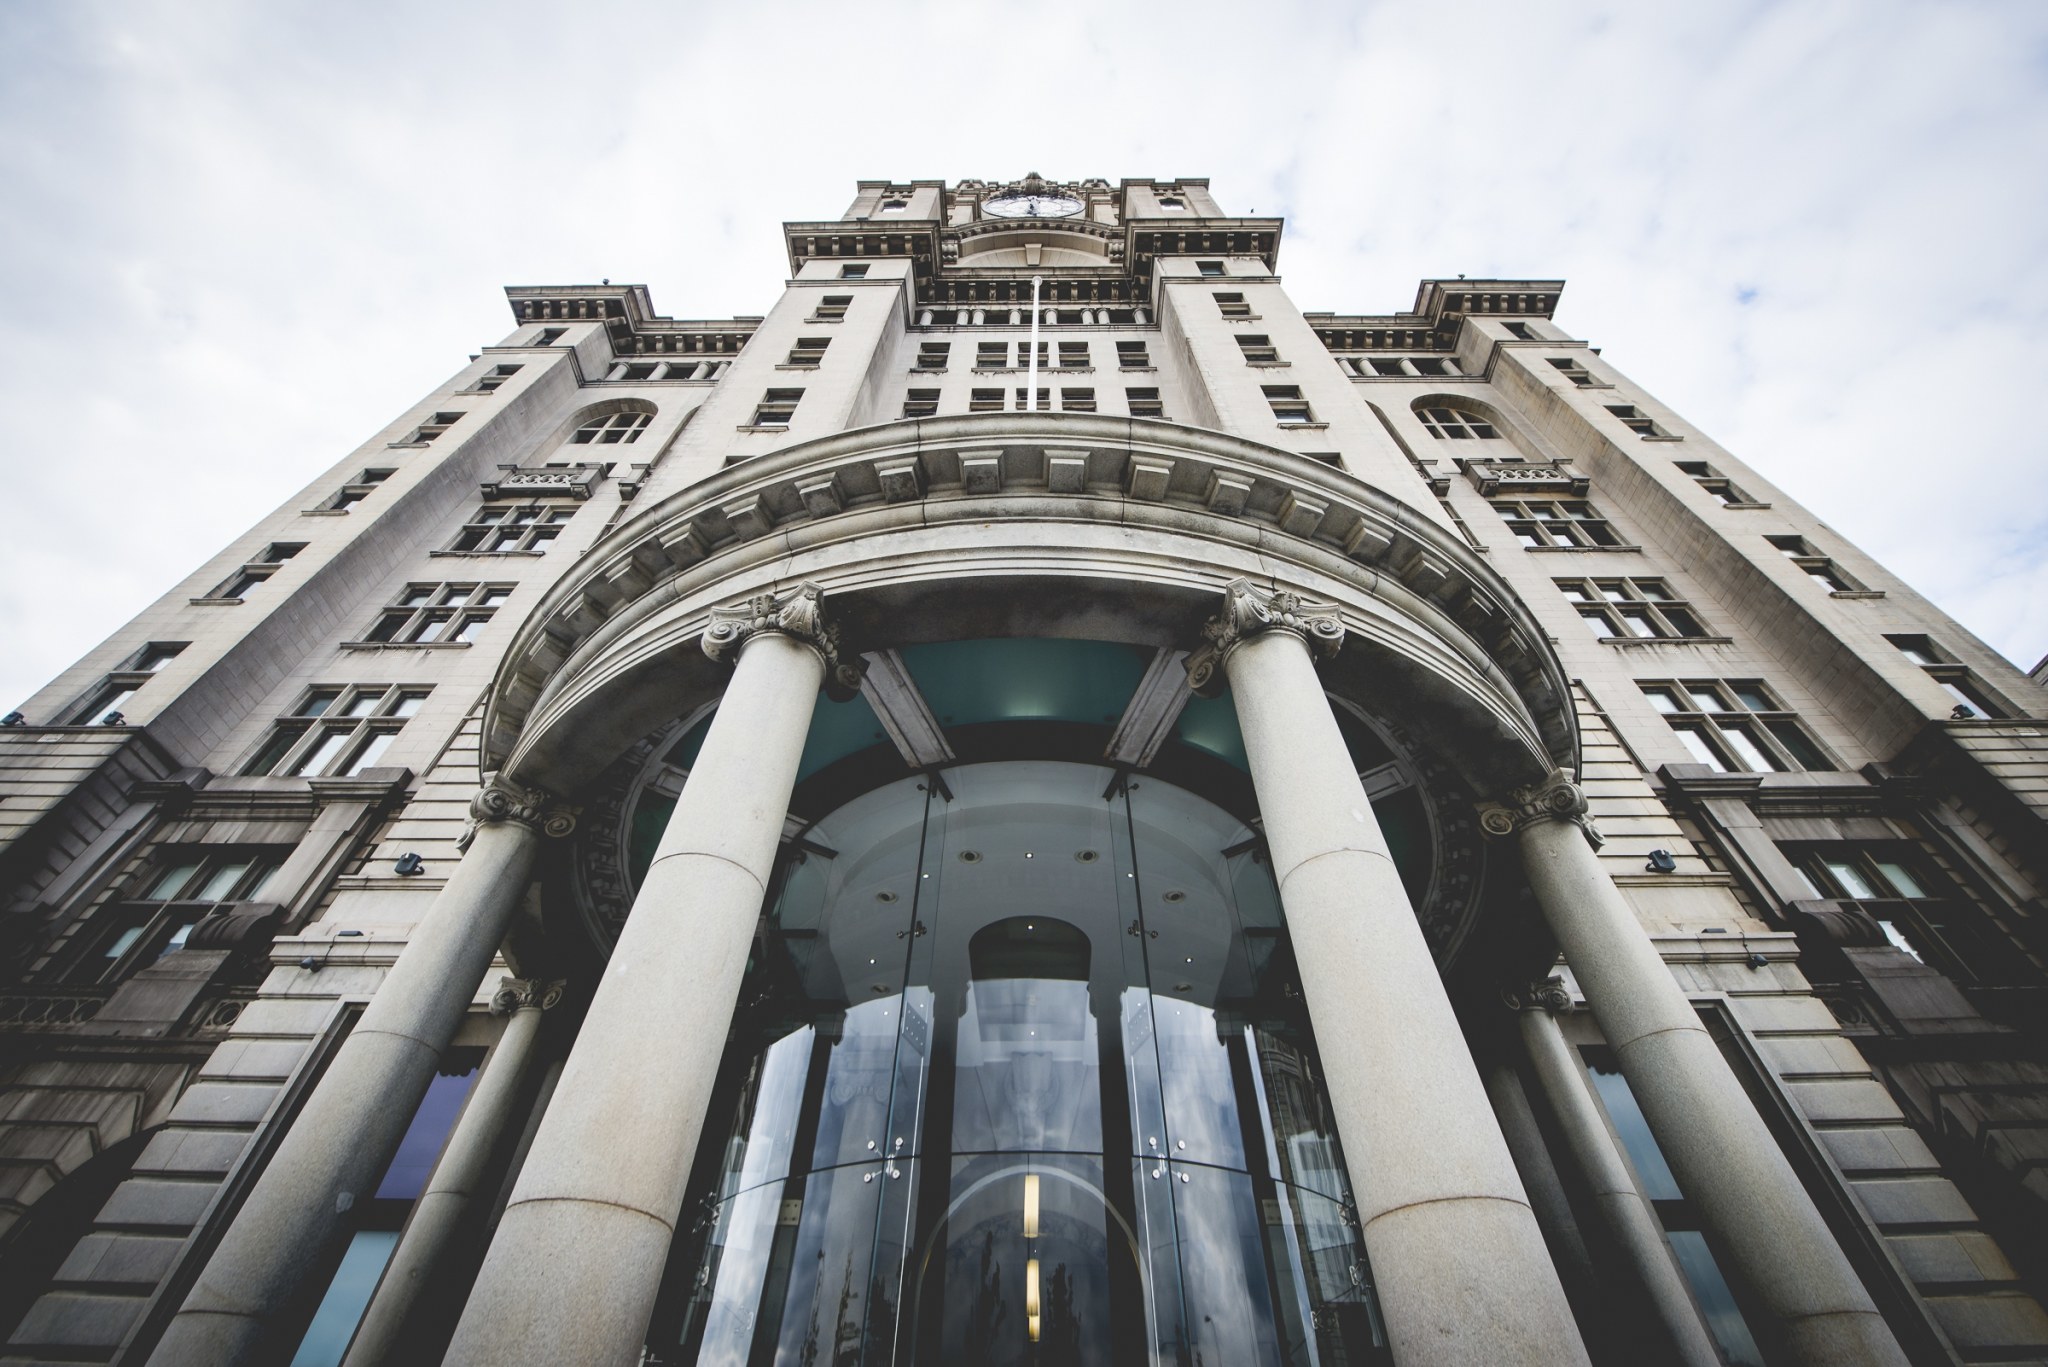 Entrance of the Royal Liver Building